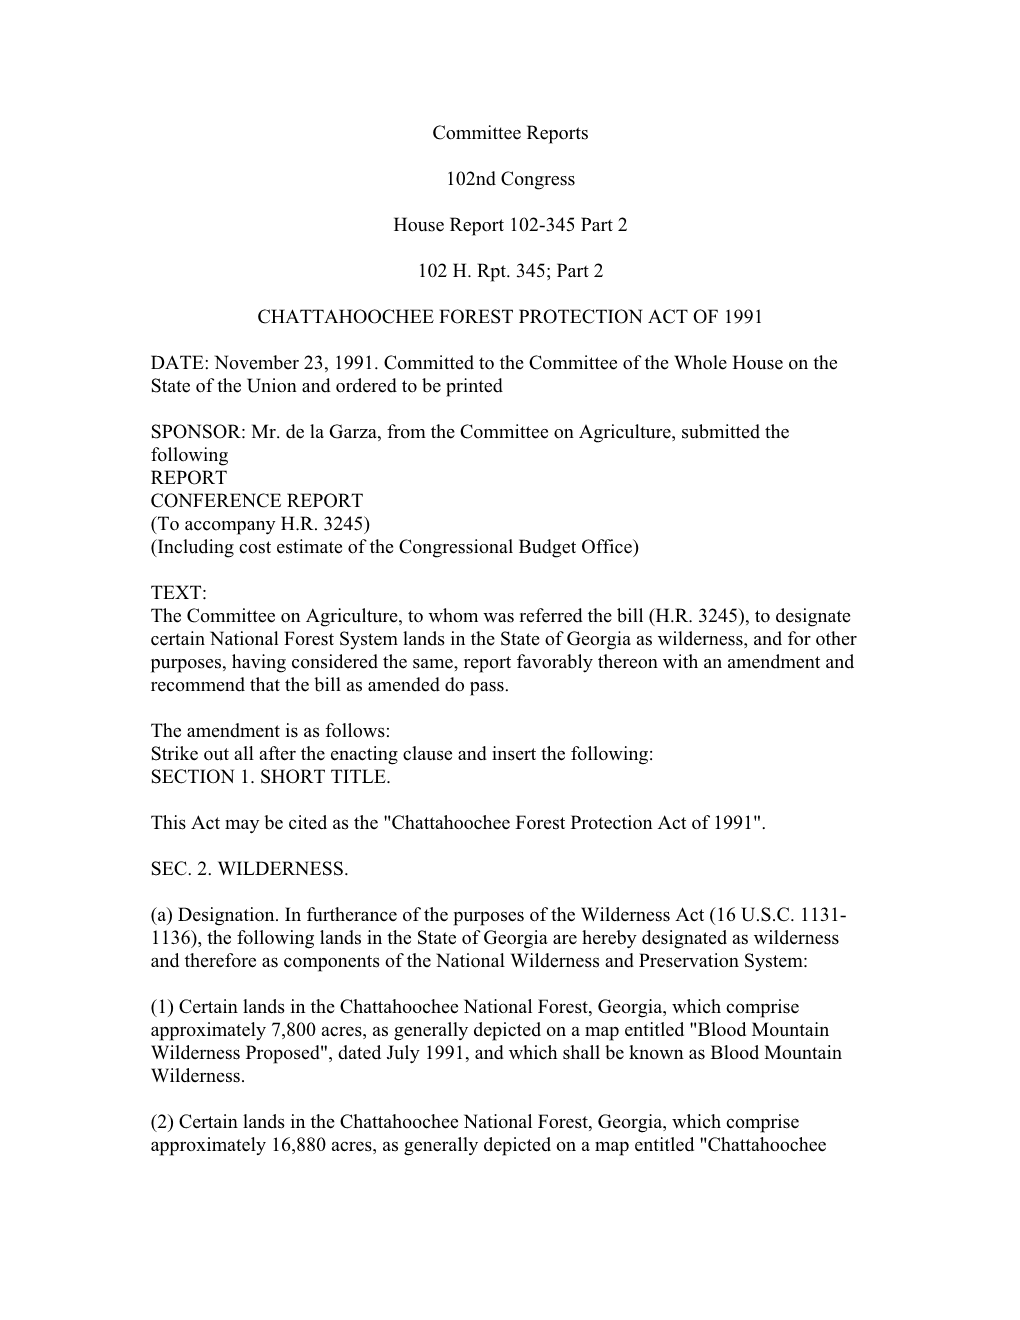 Committee Reports 102Nd Congress House Report 102-345 Part 2 102